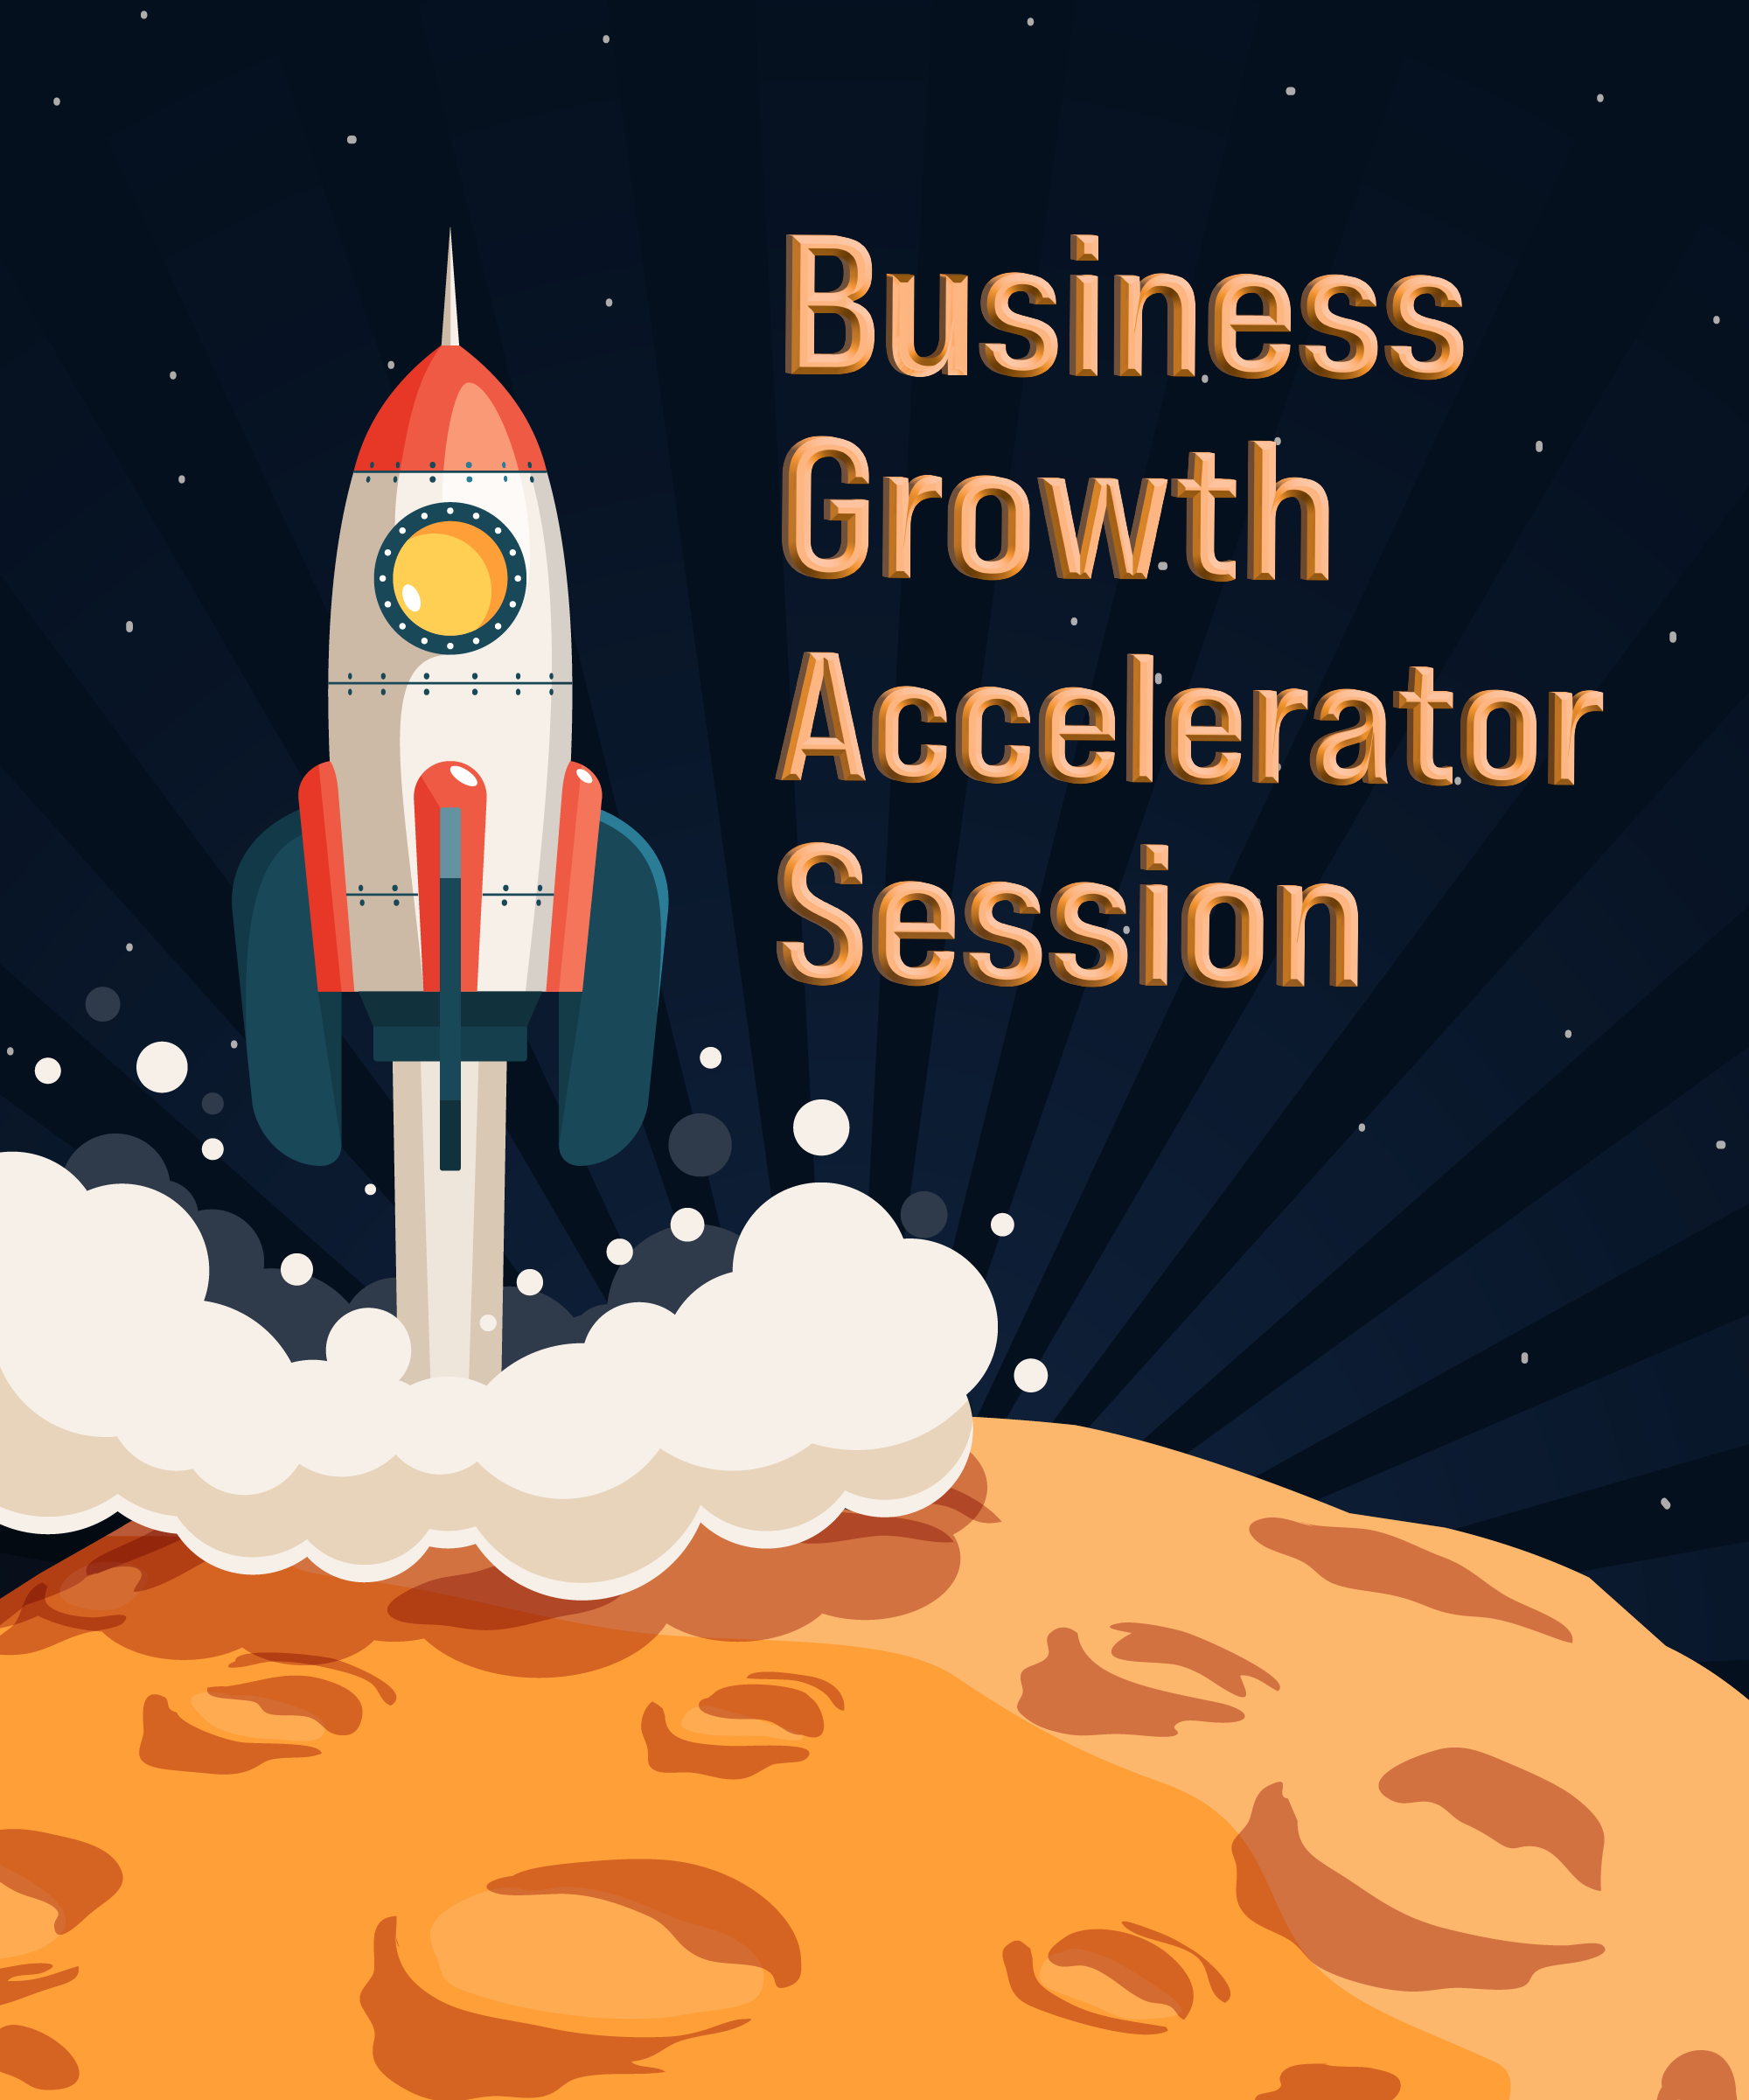 Business Growth Accelerator Session